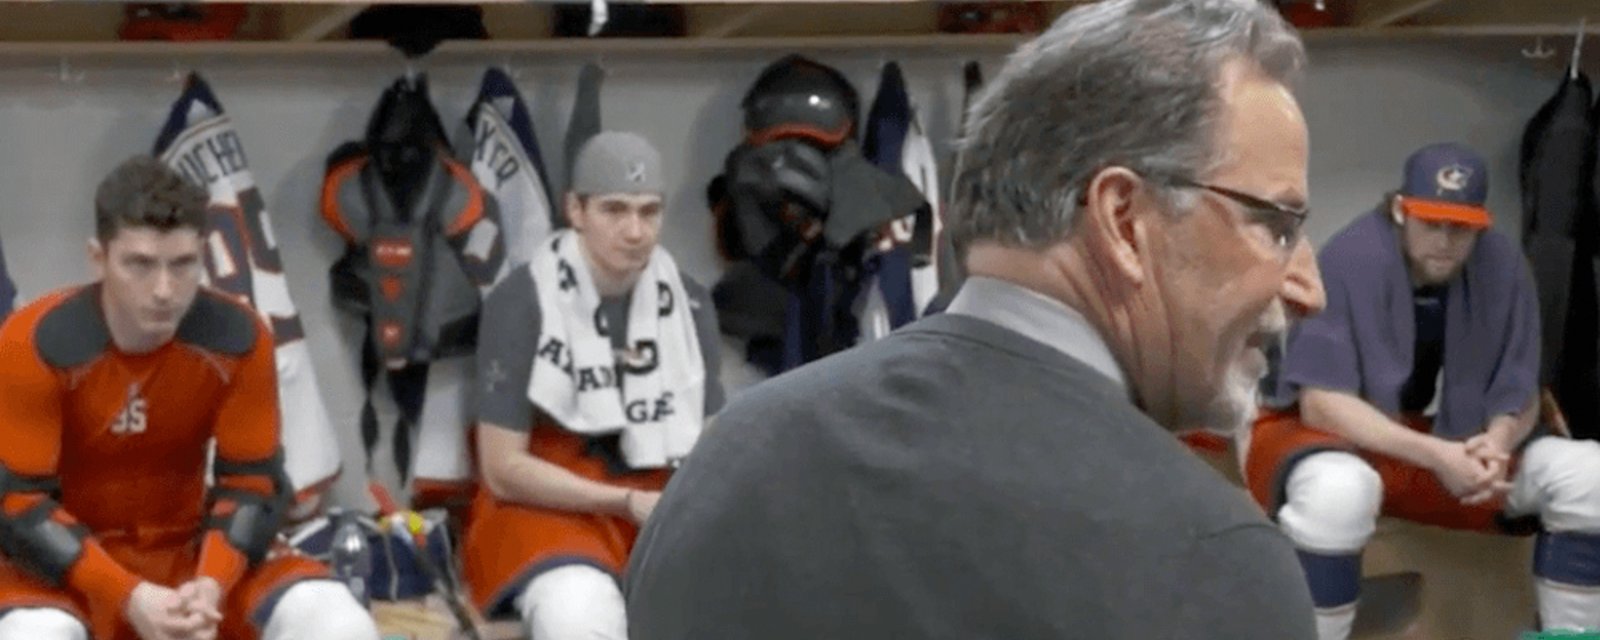 Throwback: Torts fires up the boys with an crazy expletive-laced speech 